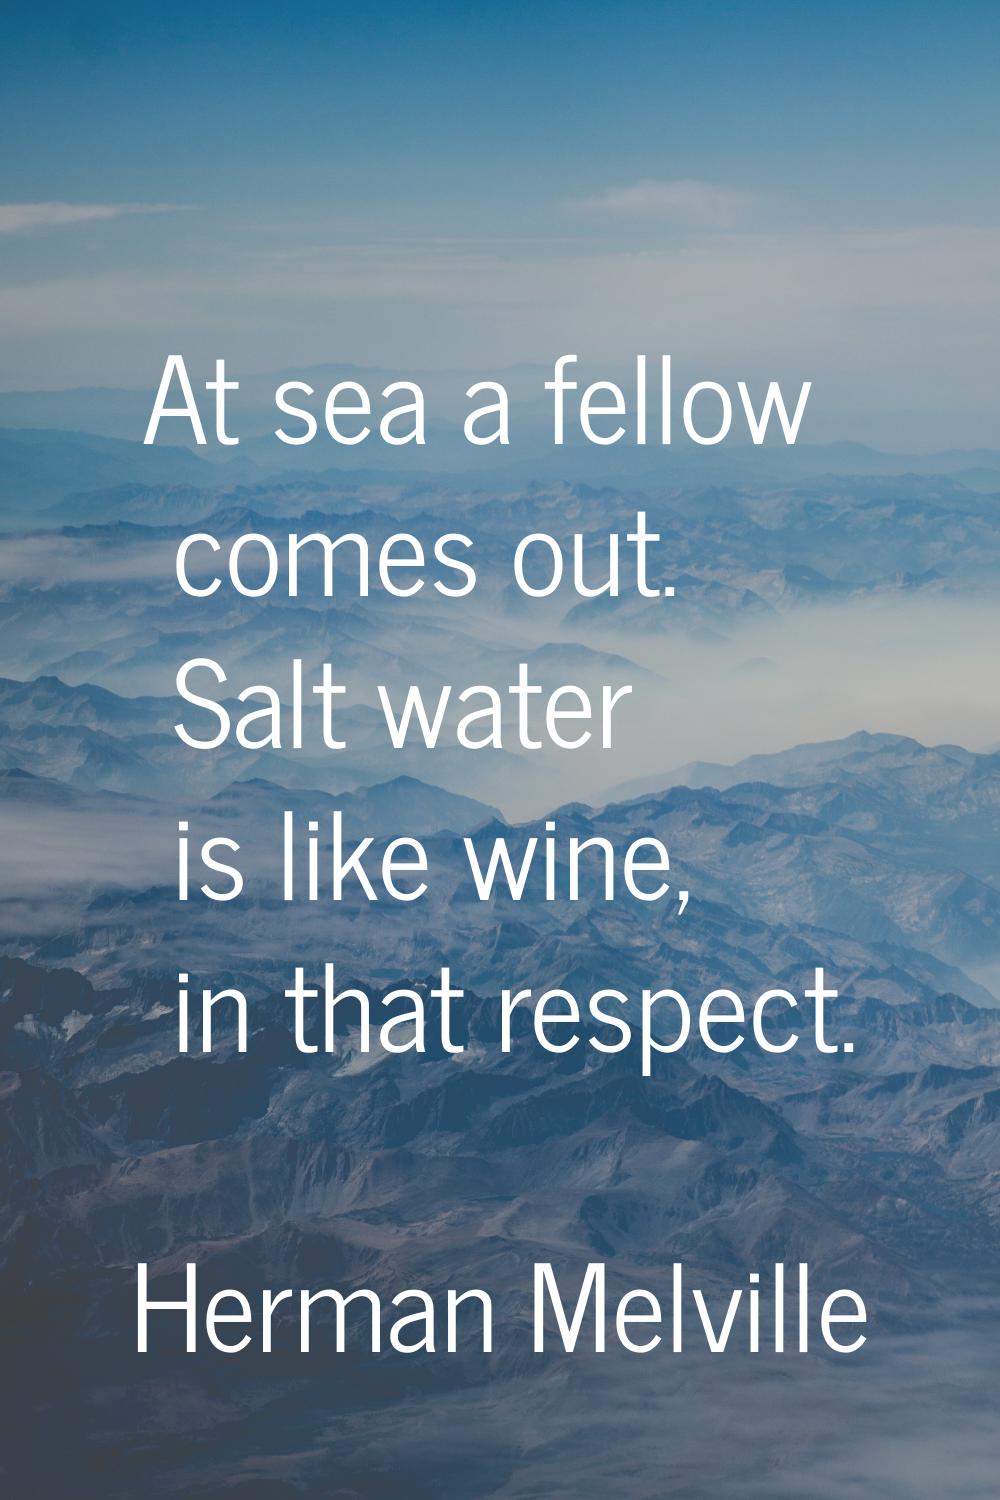 At sea a fellow comes out. Salt water is like wine, in that respect.